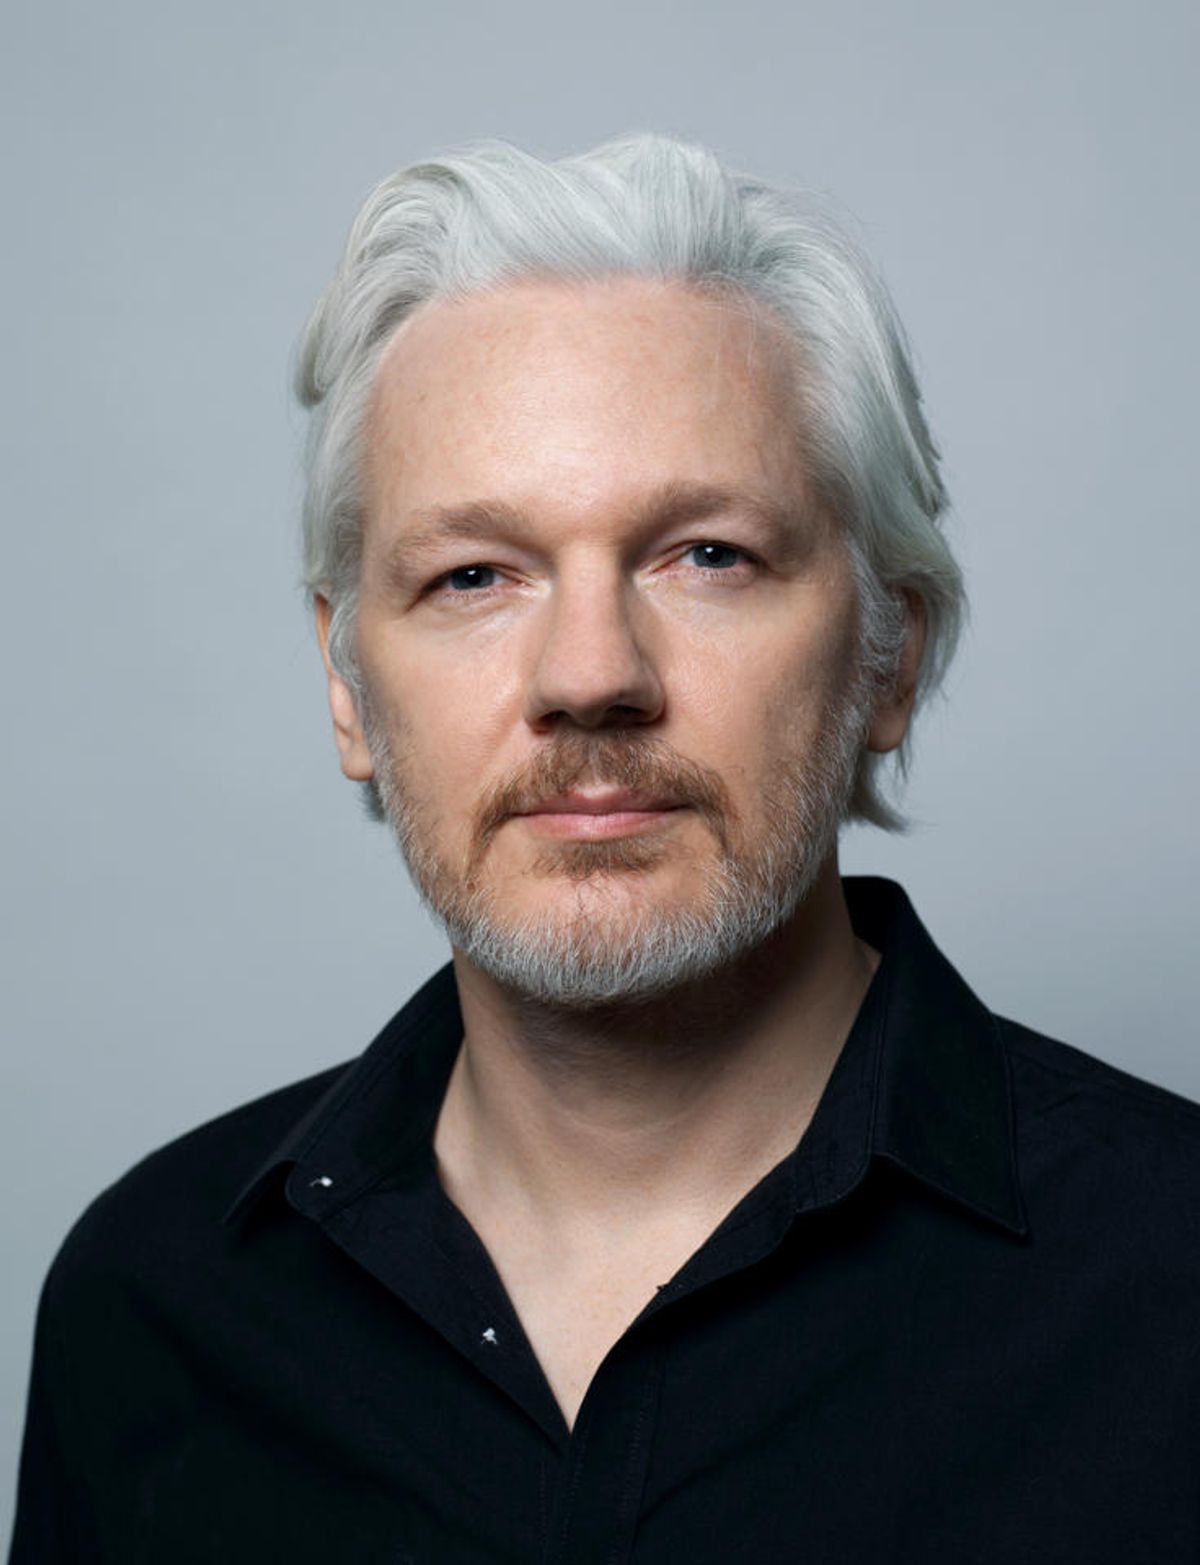 Julian Assange has been under arrest since 2010 for his role in the "cablegate" leak that exposed human rights abuses by the US government